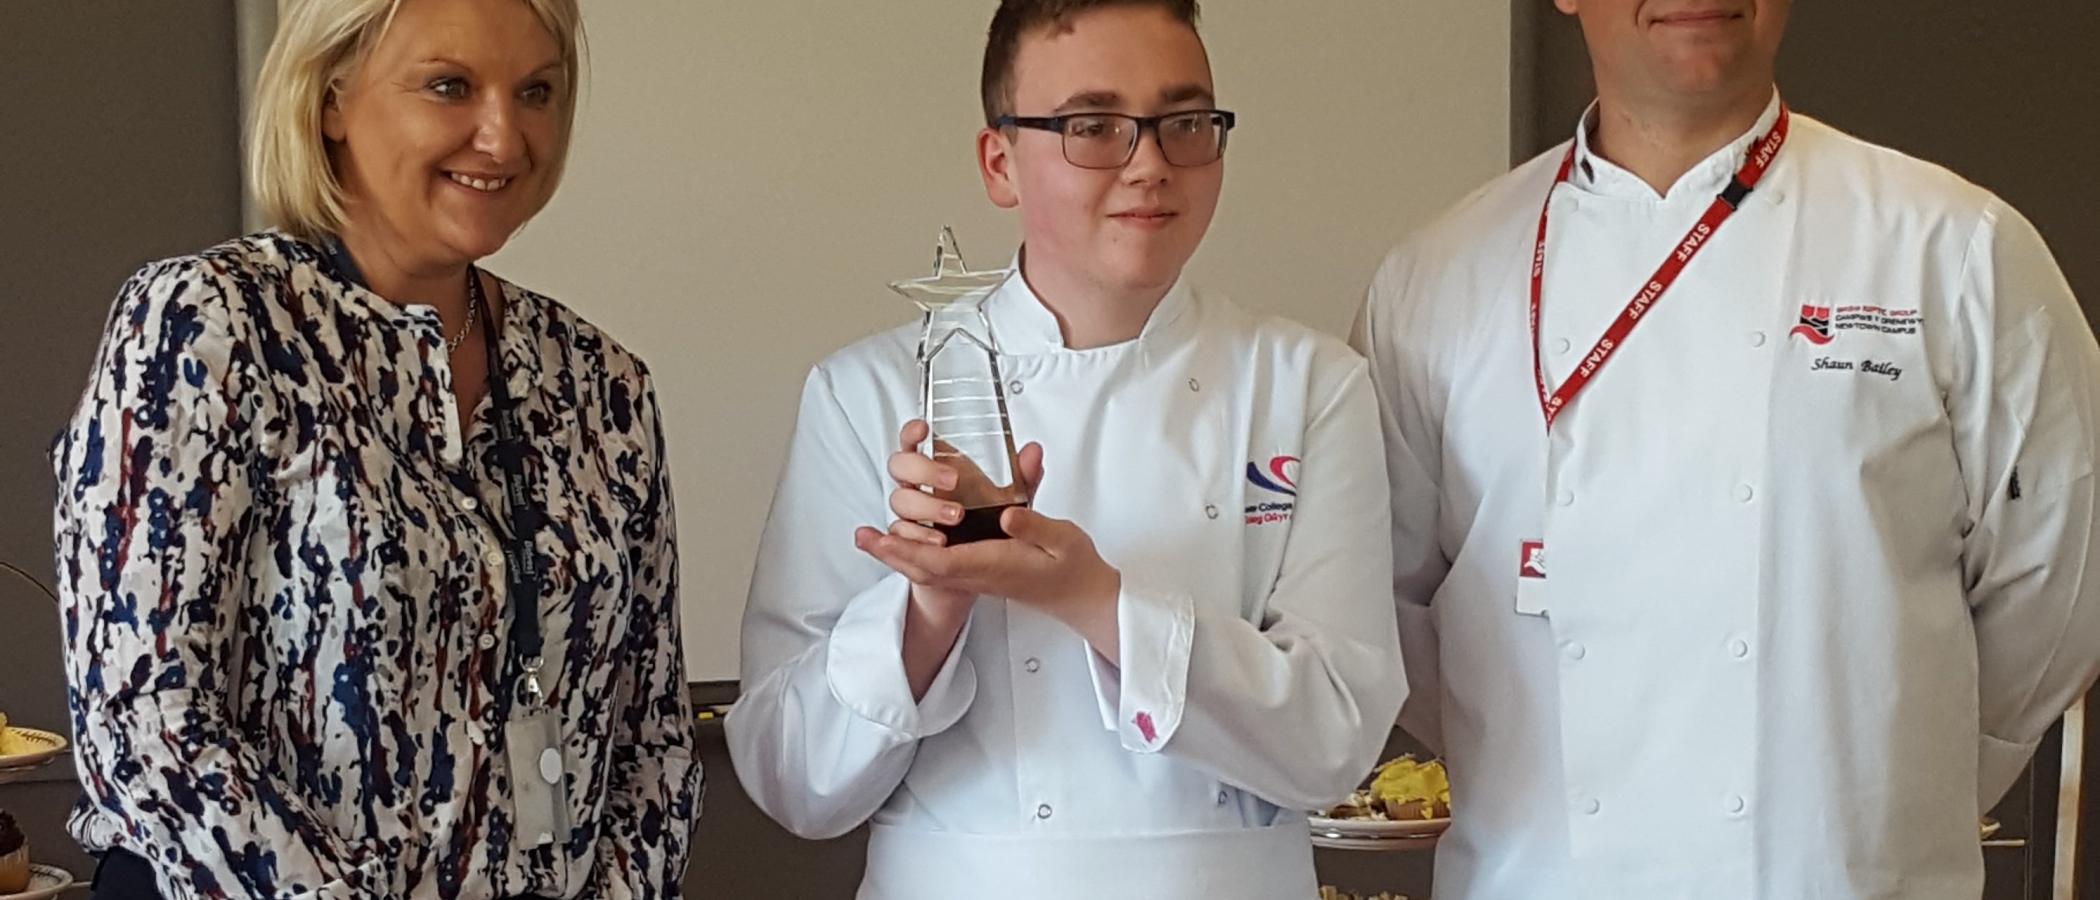 Rhys scoops Silver for his 'tea for two'